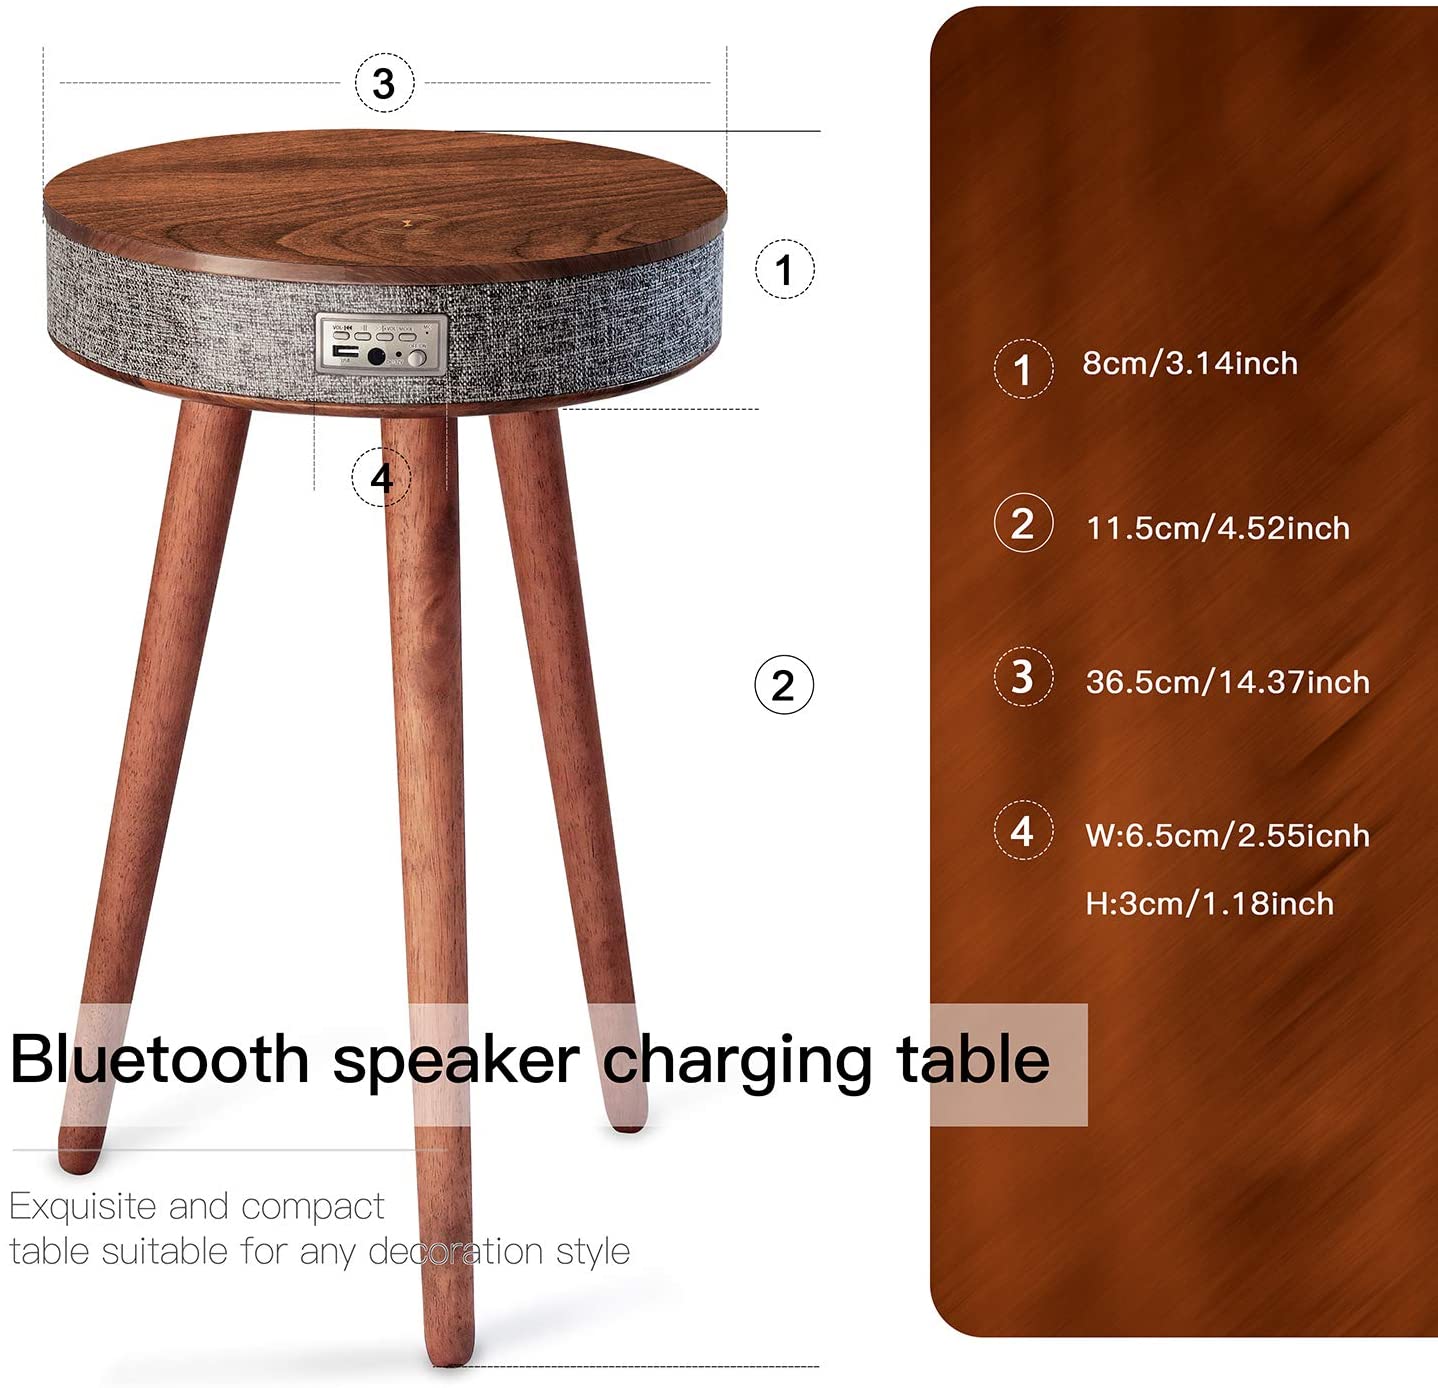 Round Smart Coffee Table with Bluetooth Portable Multifunctional HD Speakers 360 Surround Built-in QI Wireless Charger USB AUX Input Beside Modern Wood Smart Spearker Outdoor End Table